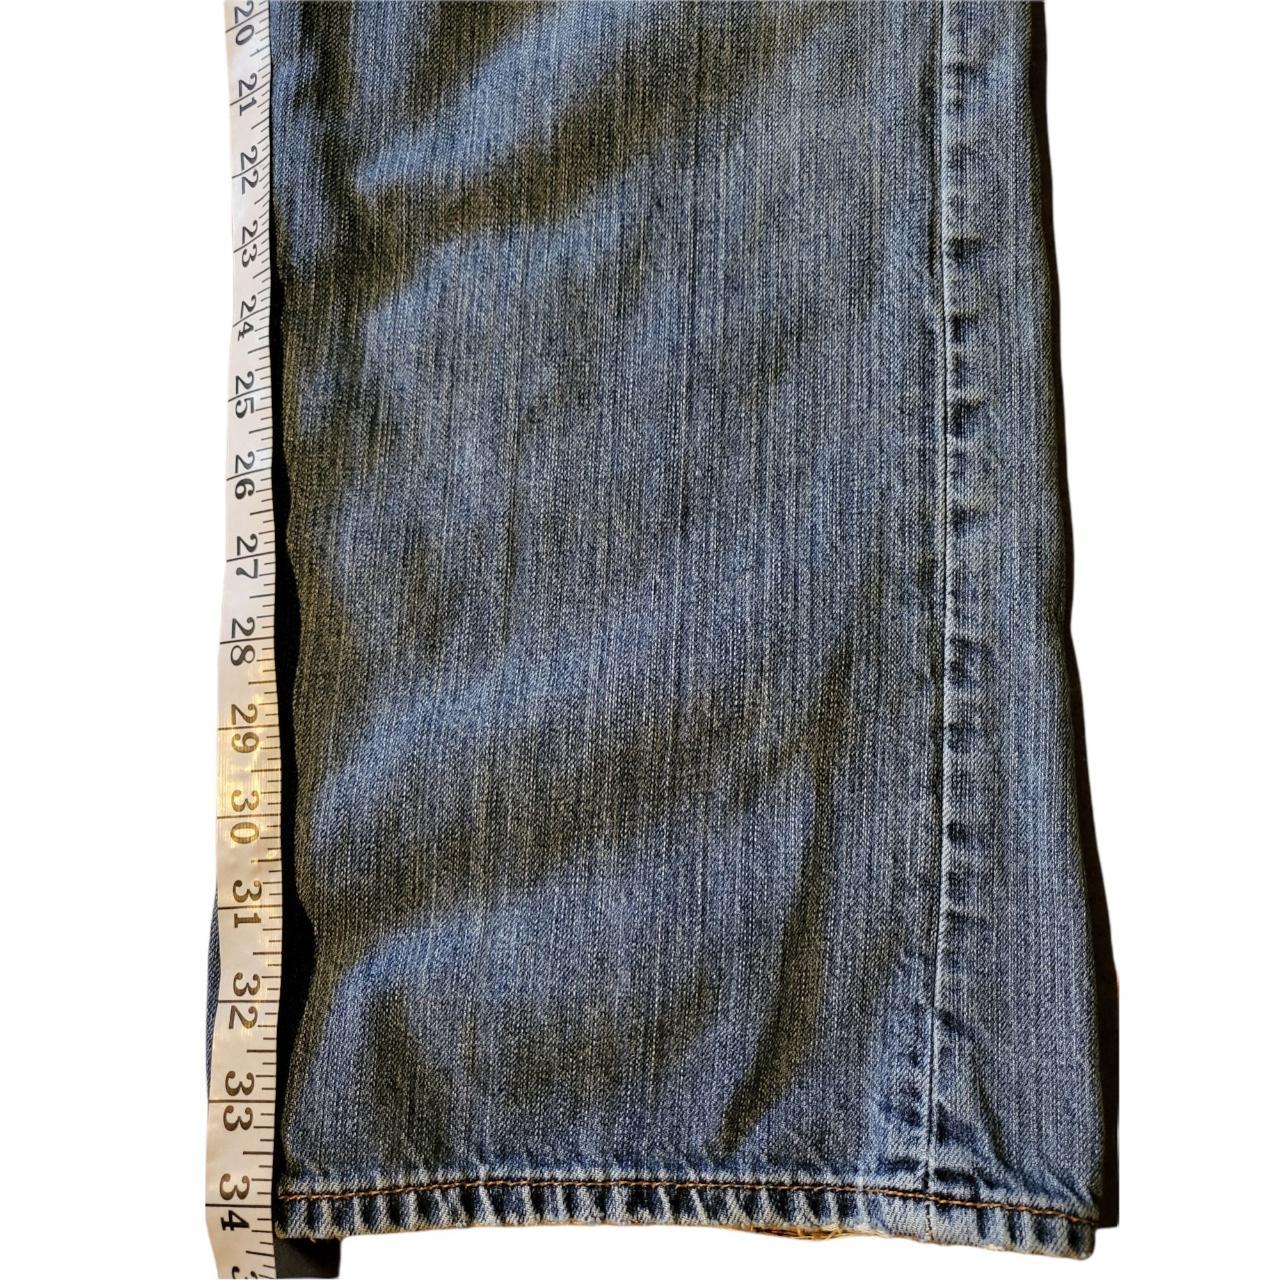 Lucky Brand 181 Relaxed Straight Jeans Color: Blue - Depop